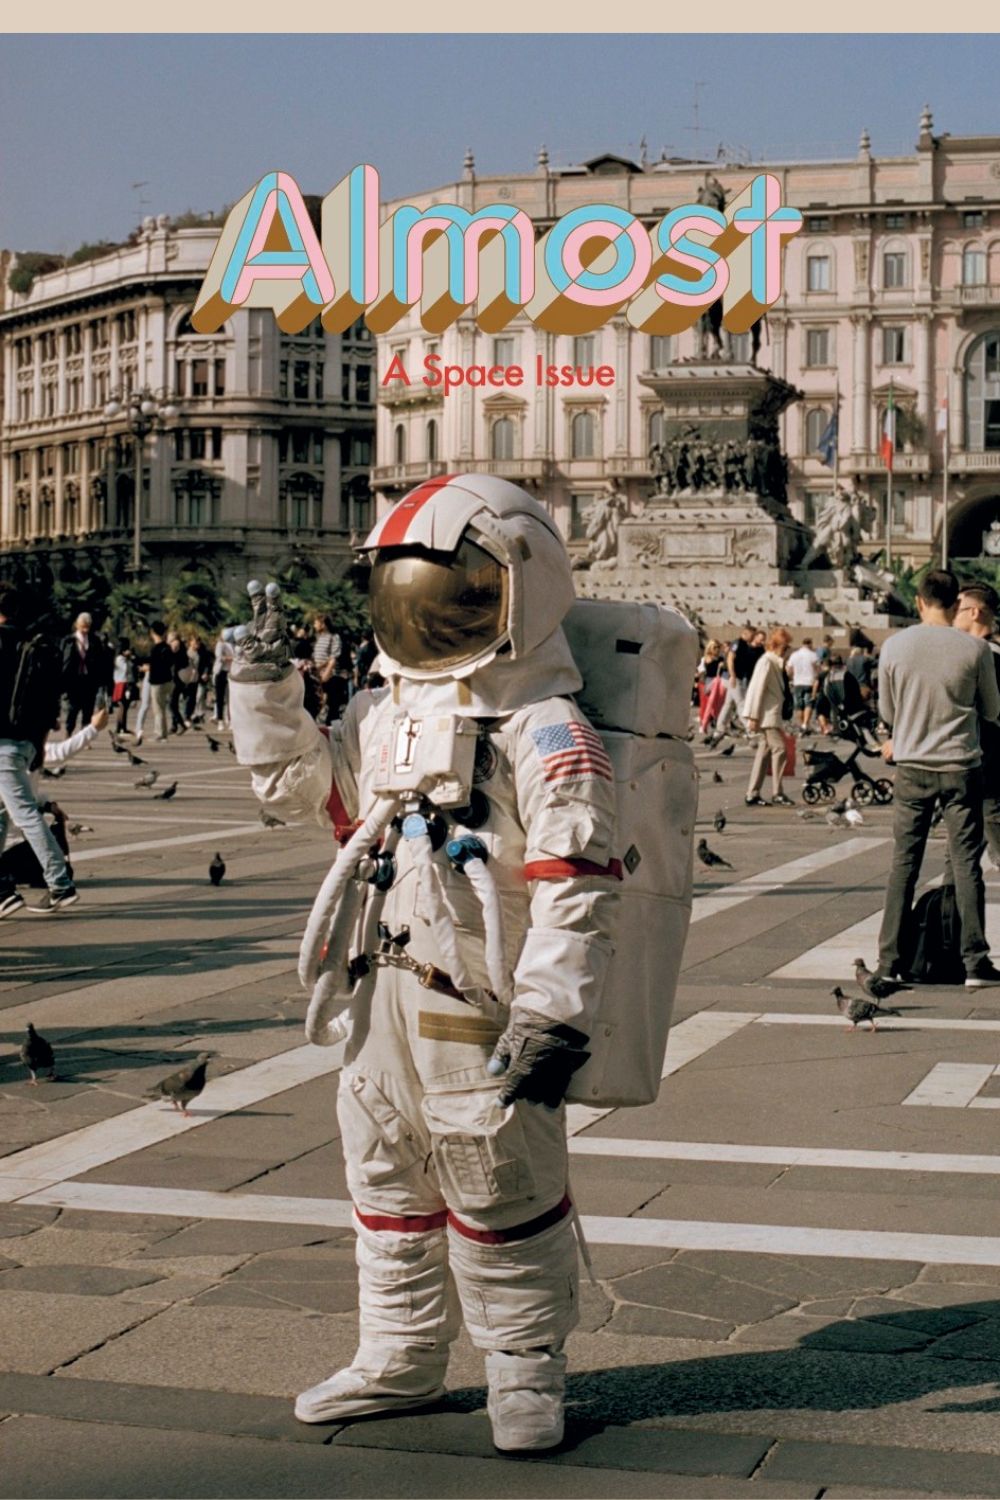 Almost Magazine - A Space issue cover